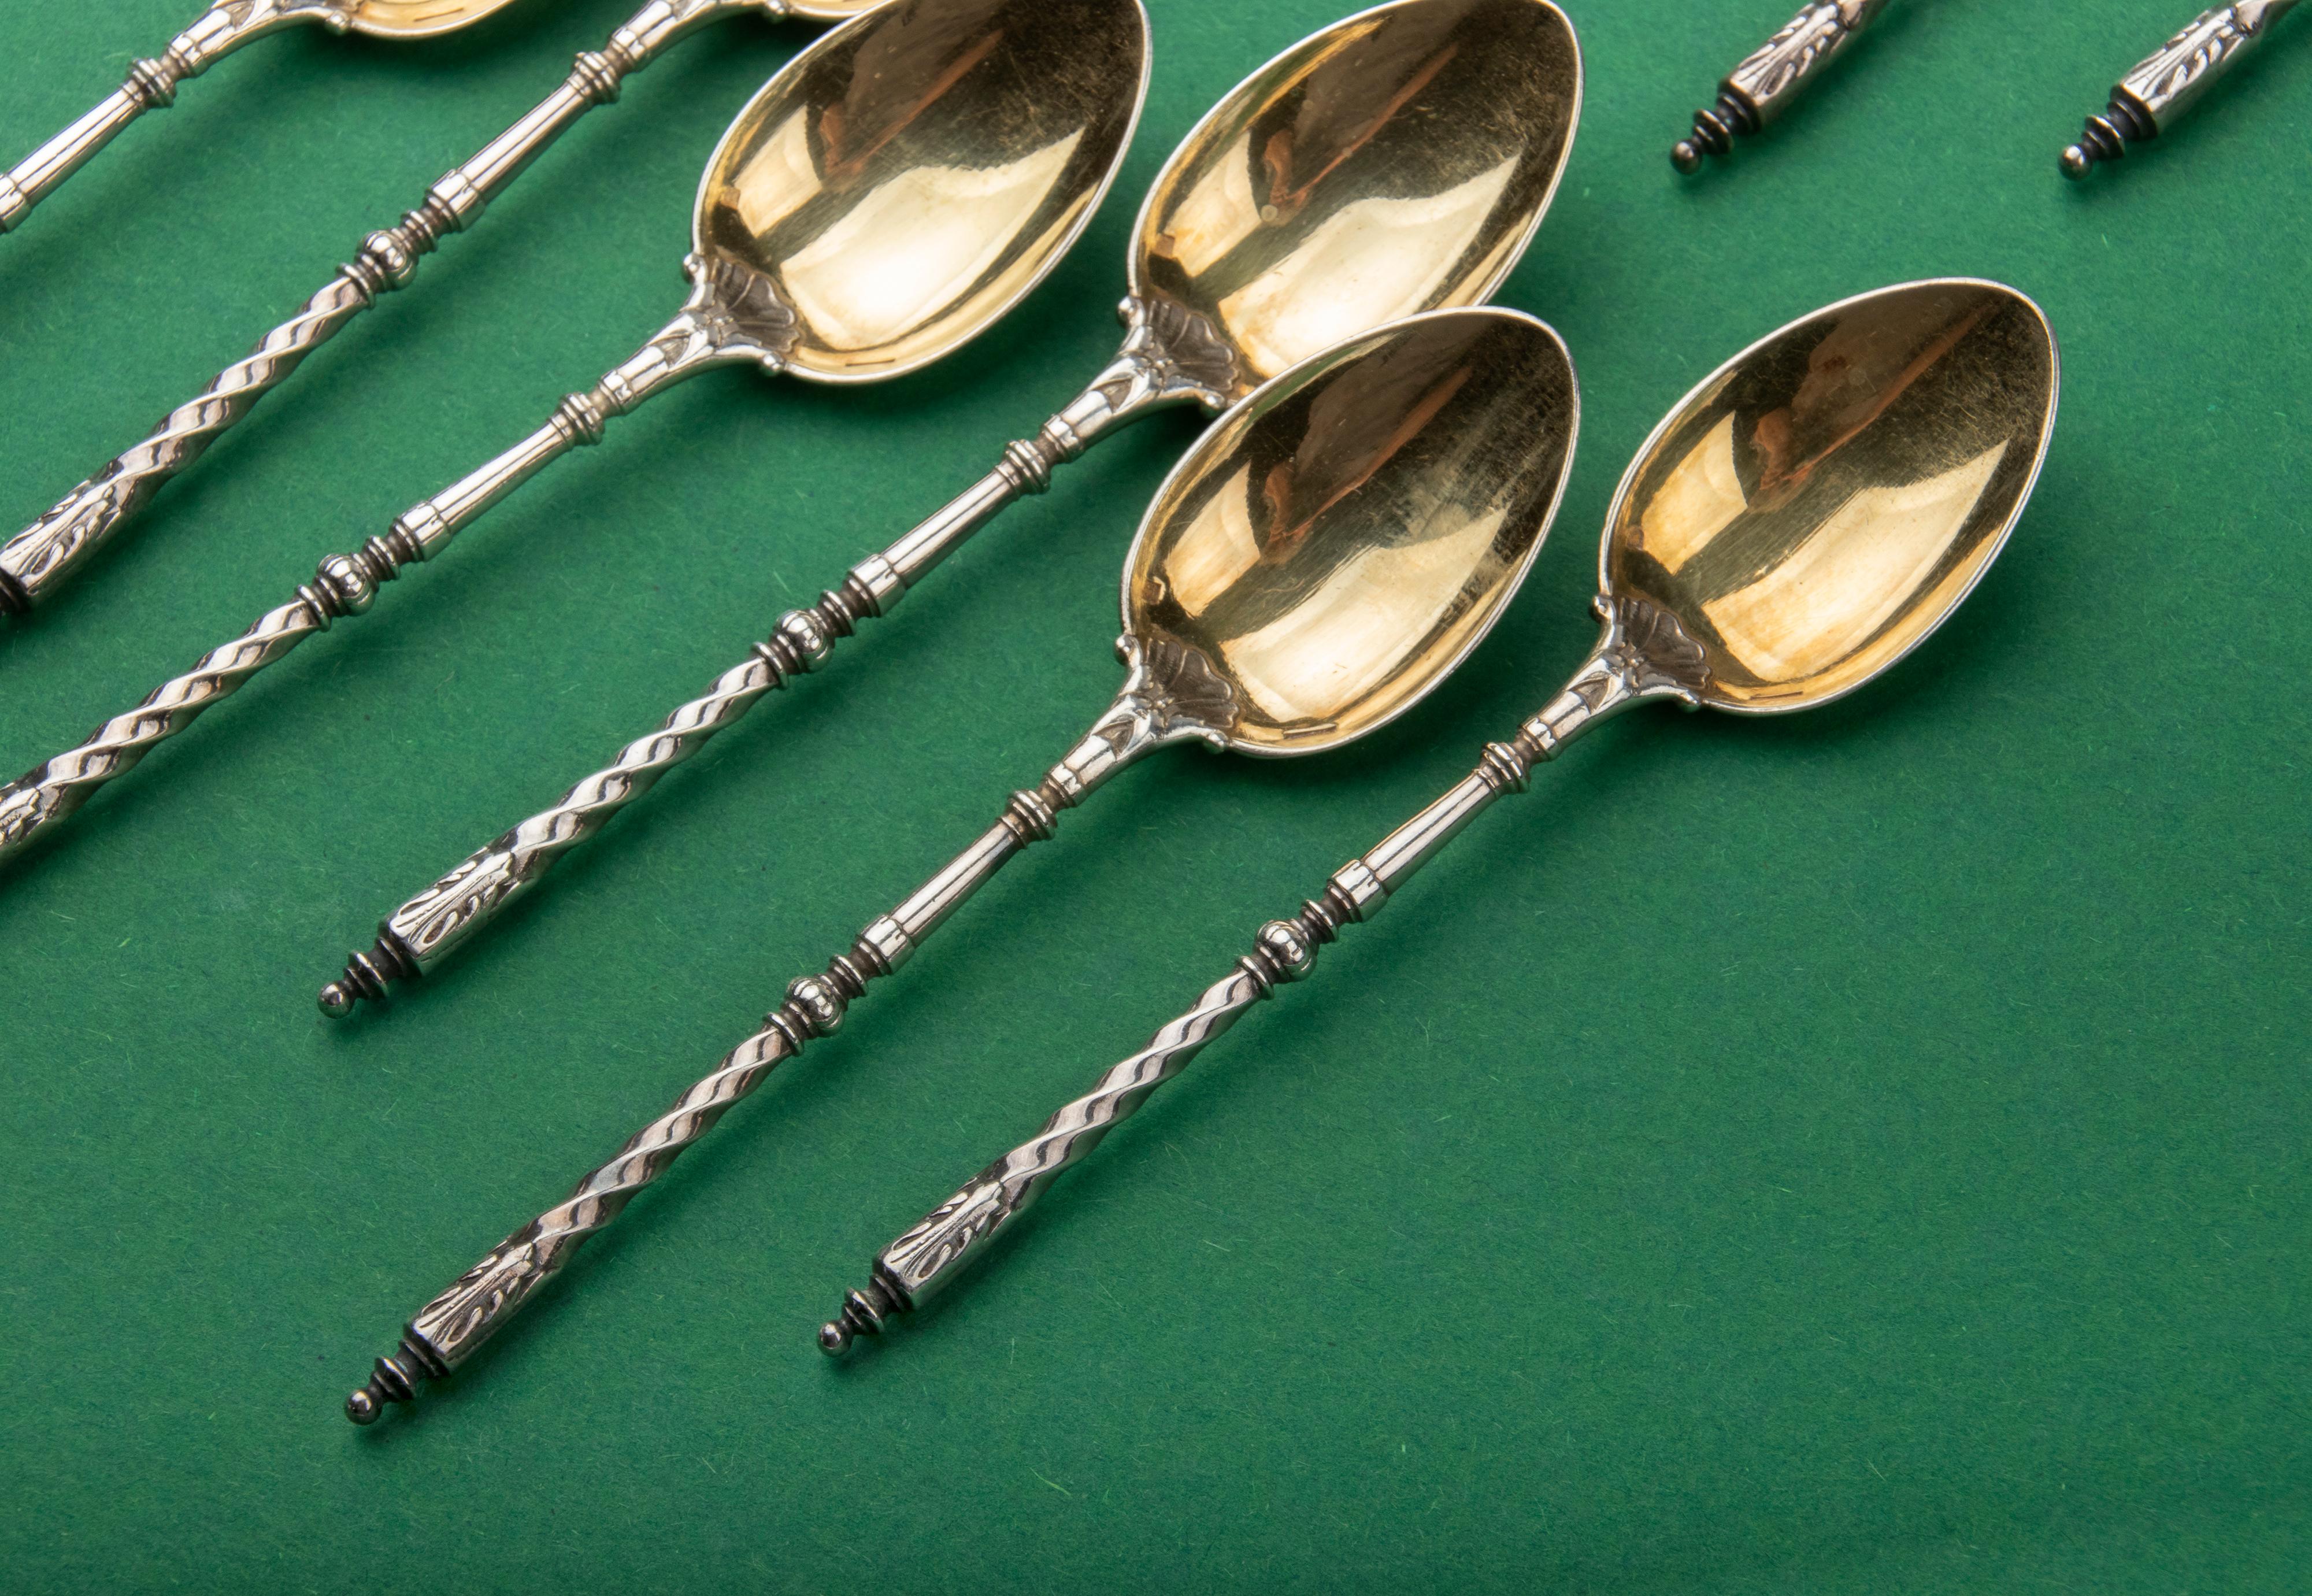 French Set of 12 Antique Silver-Plated and Gilded Tea spoons made by Christofle For Sale